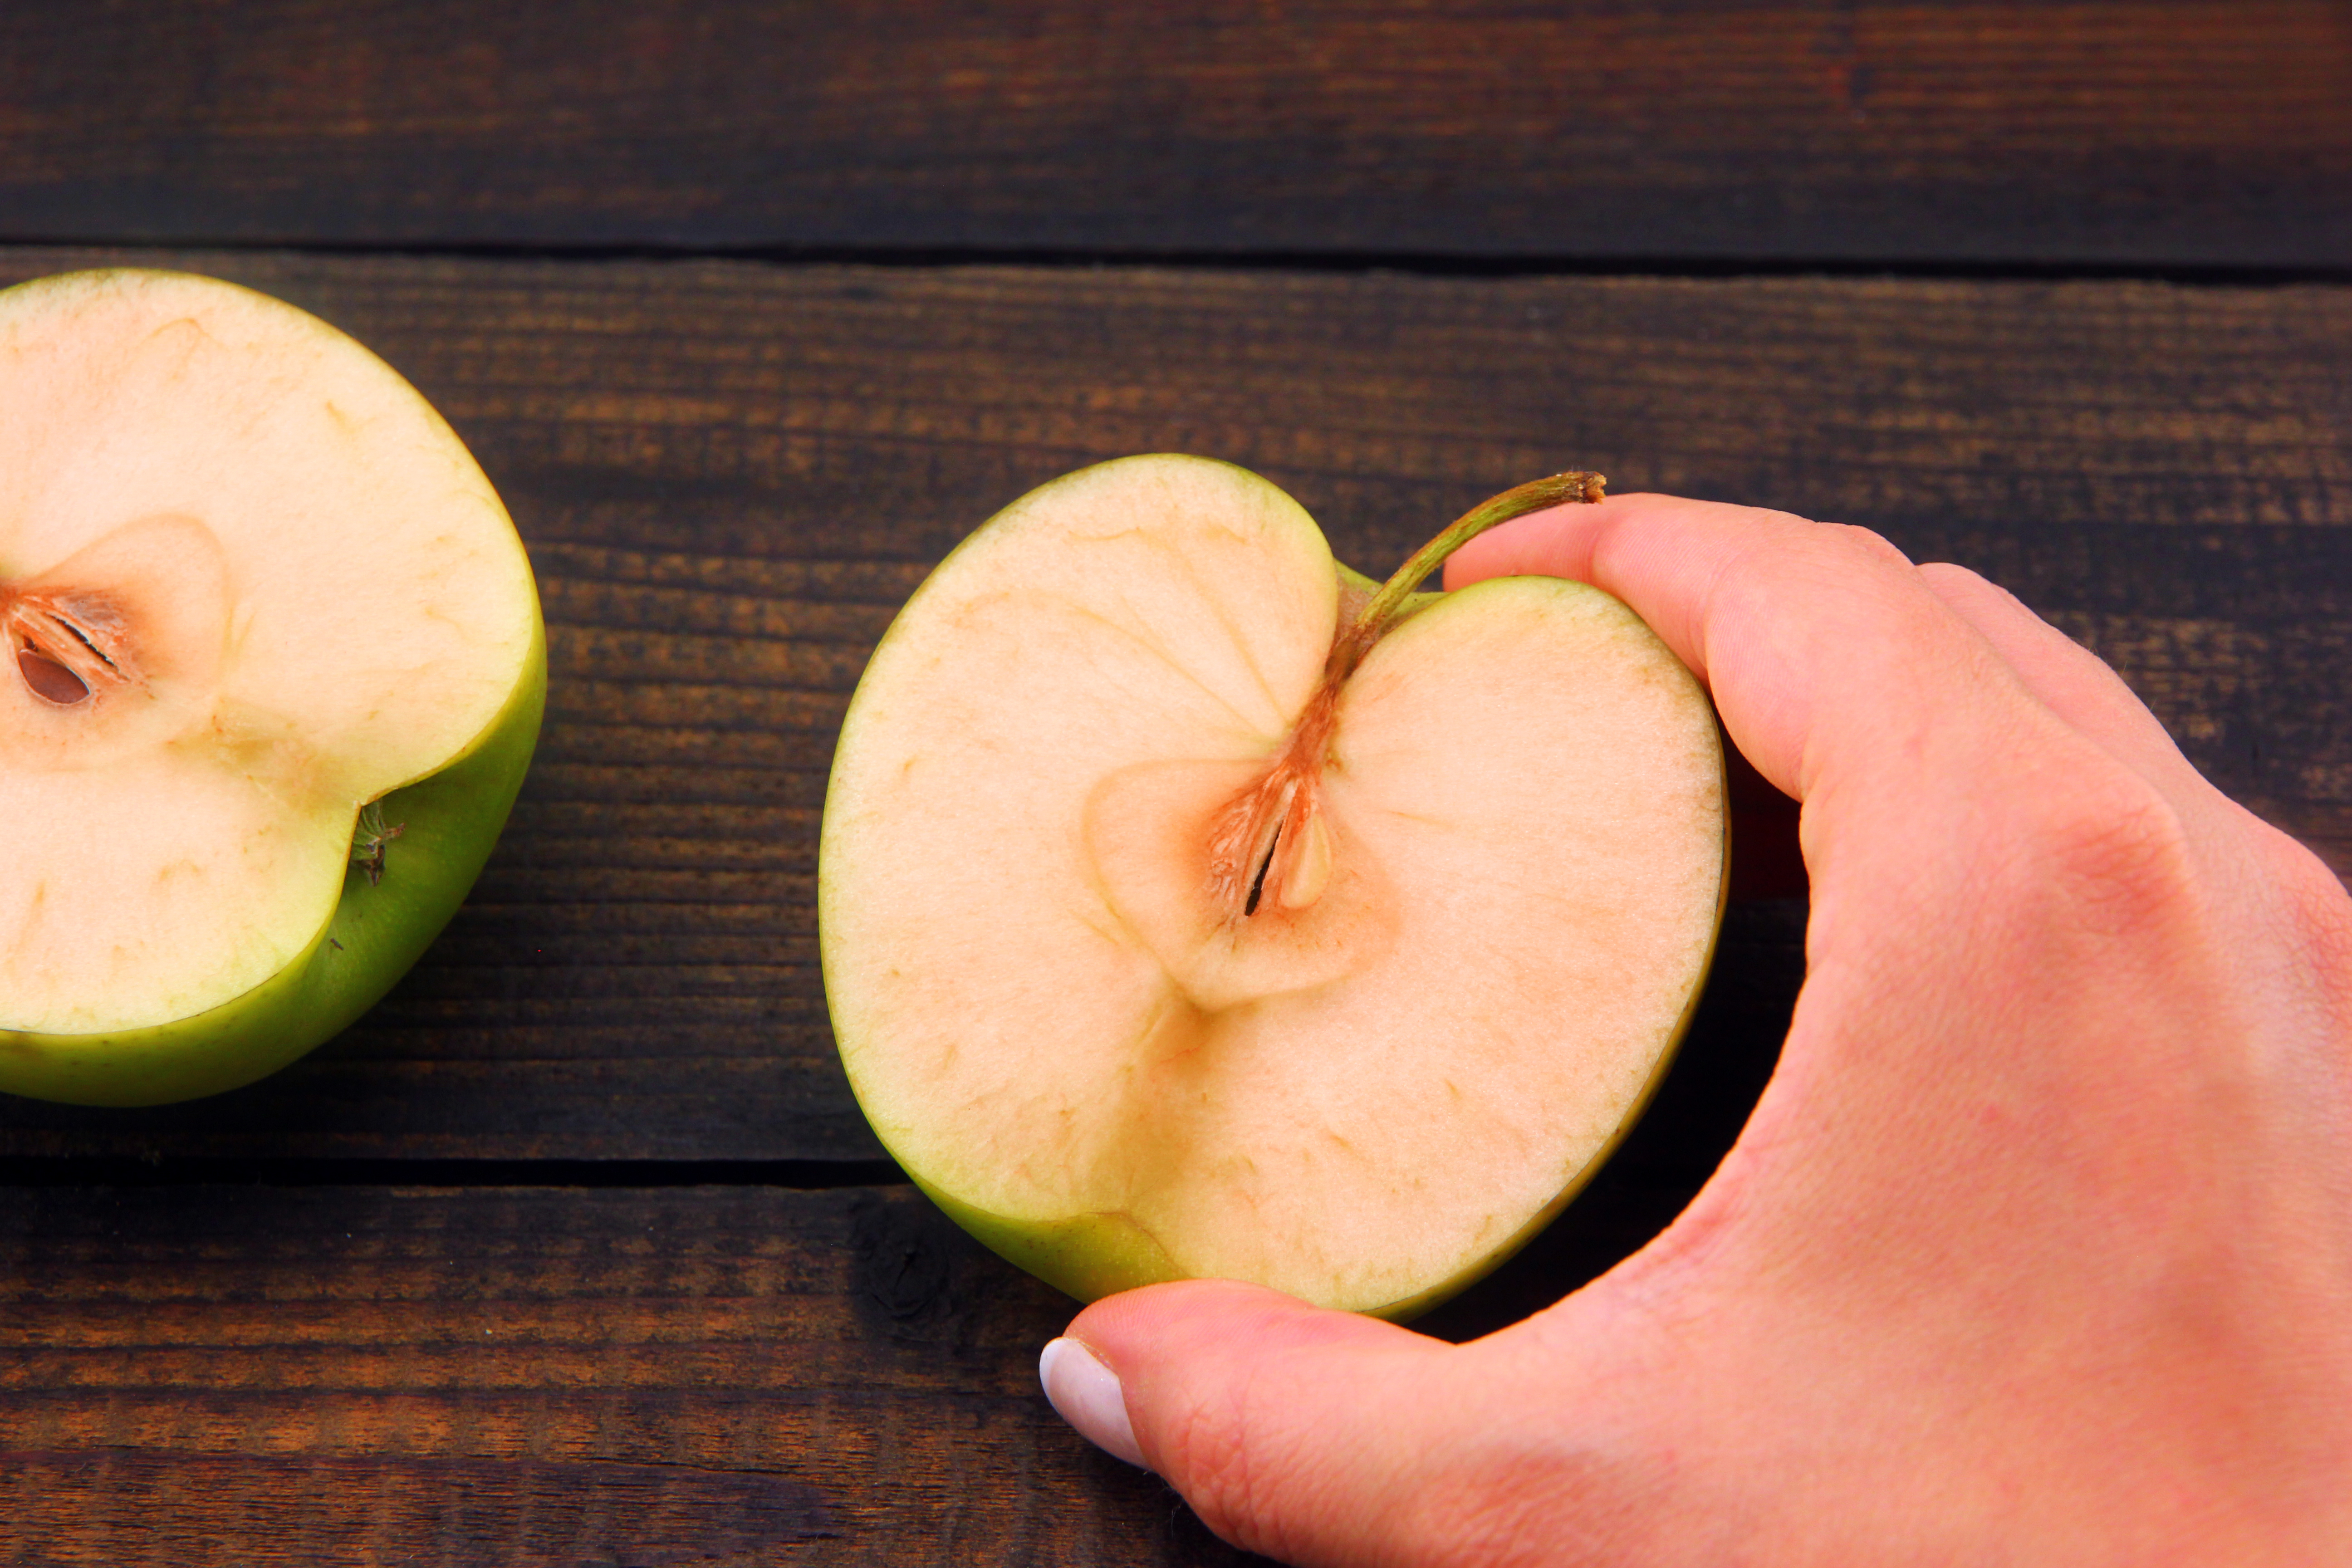 Does a Kiwifruit Turn Brown After Being Sliced?